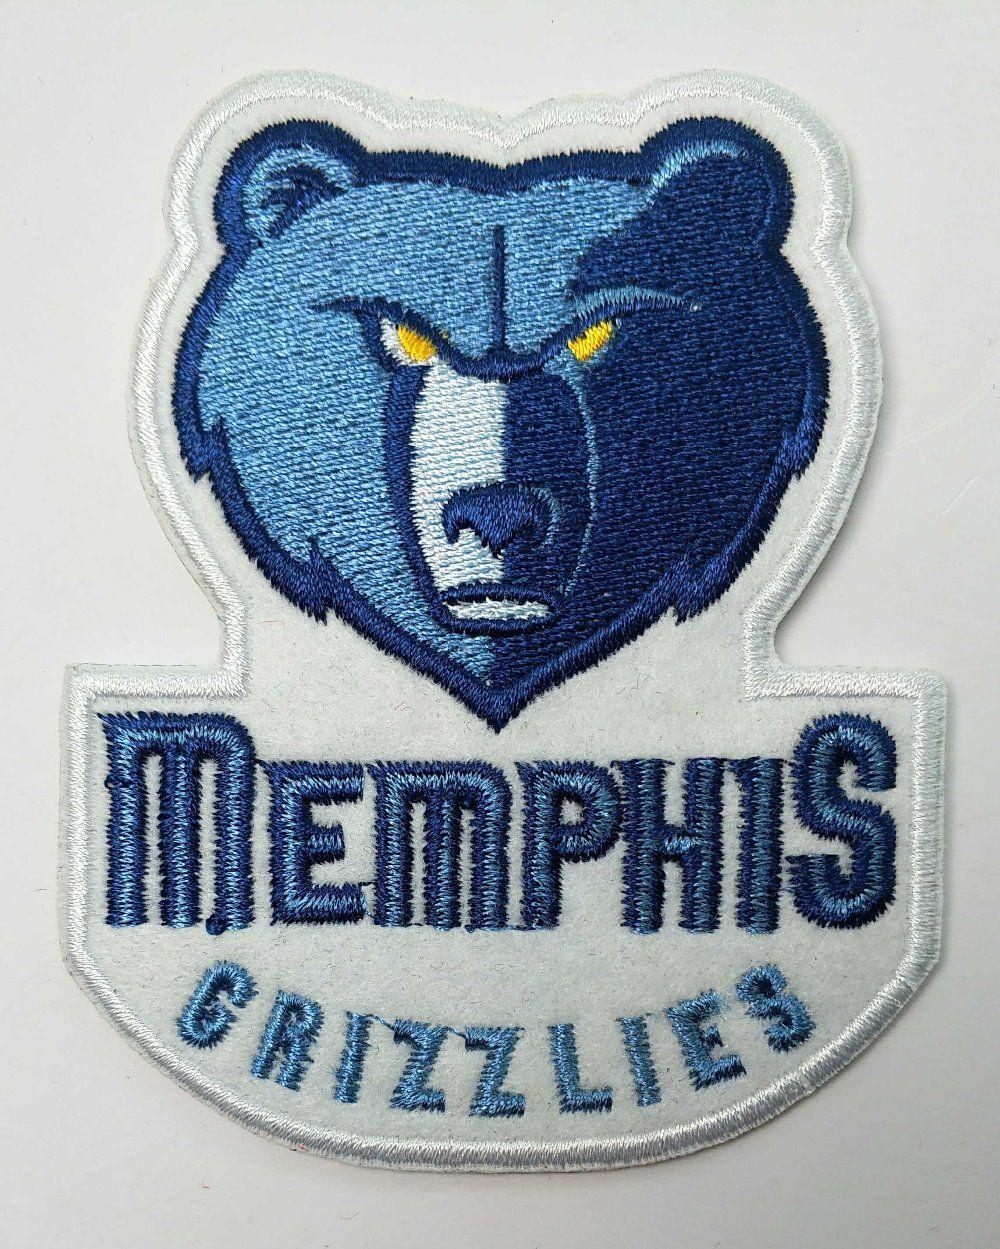 Gizzlies Logo - 2pcs Basketball NBA club team Vancouver Grizzlies Logo Patch Aufnaeher  Applique Buegelbild Embroidered -in Tape from Home Improvement on ...